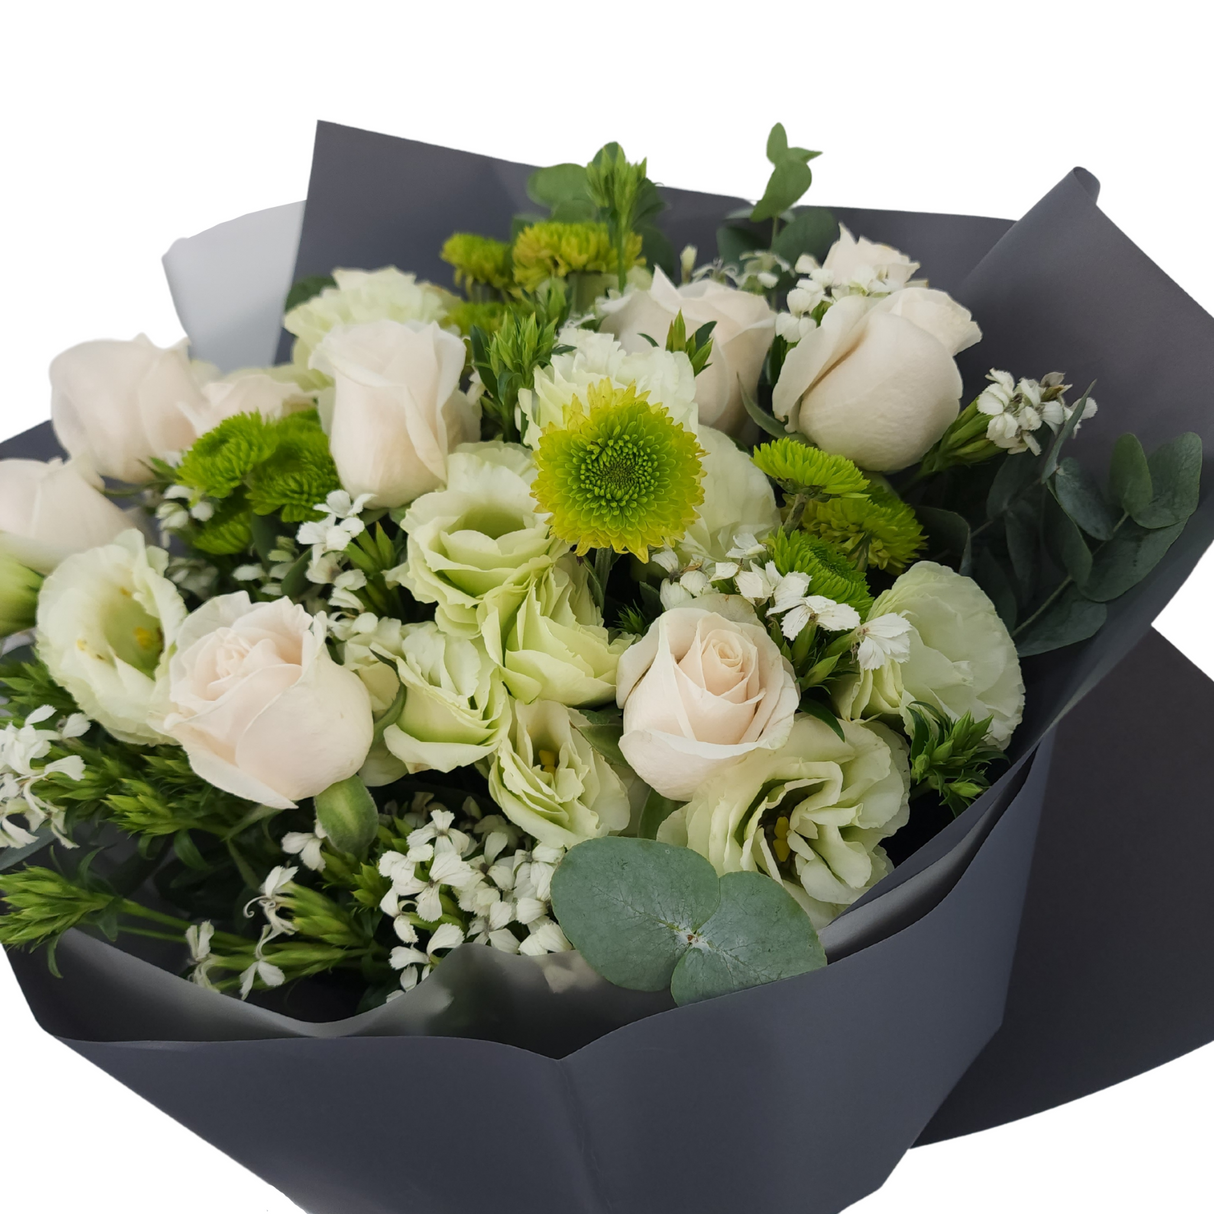 emily White & Green Roses Bouquet Birthday Flower Bouquet Singapore